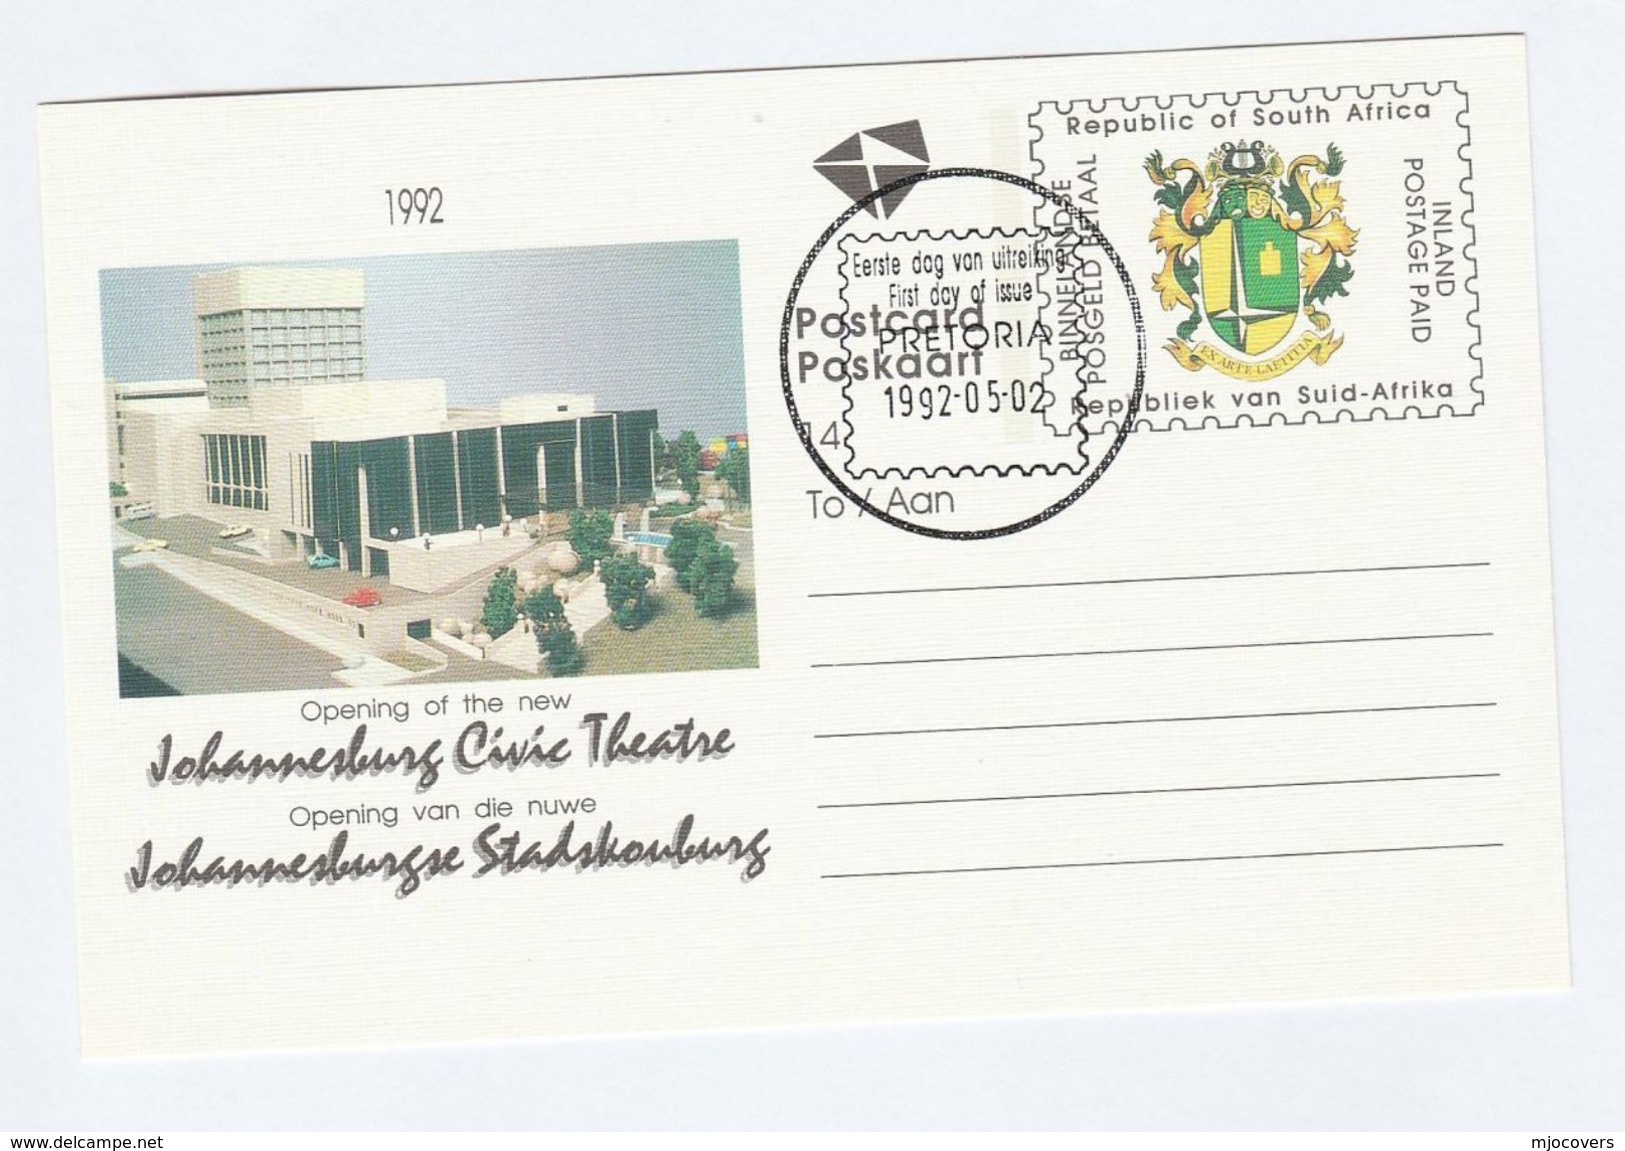 1992 SOUTH AFRICA STATIONERY Illus CIVIC THEATRE At JOHANNESBURG , FIRST DAY Rsa Stamps Postal Card Cover - Briefe U. Dokumente